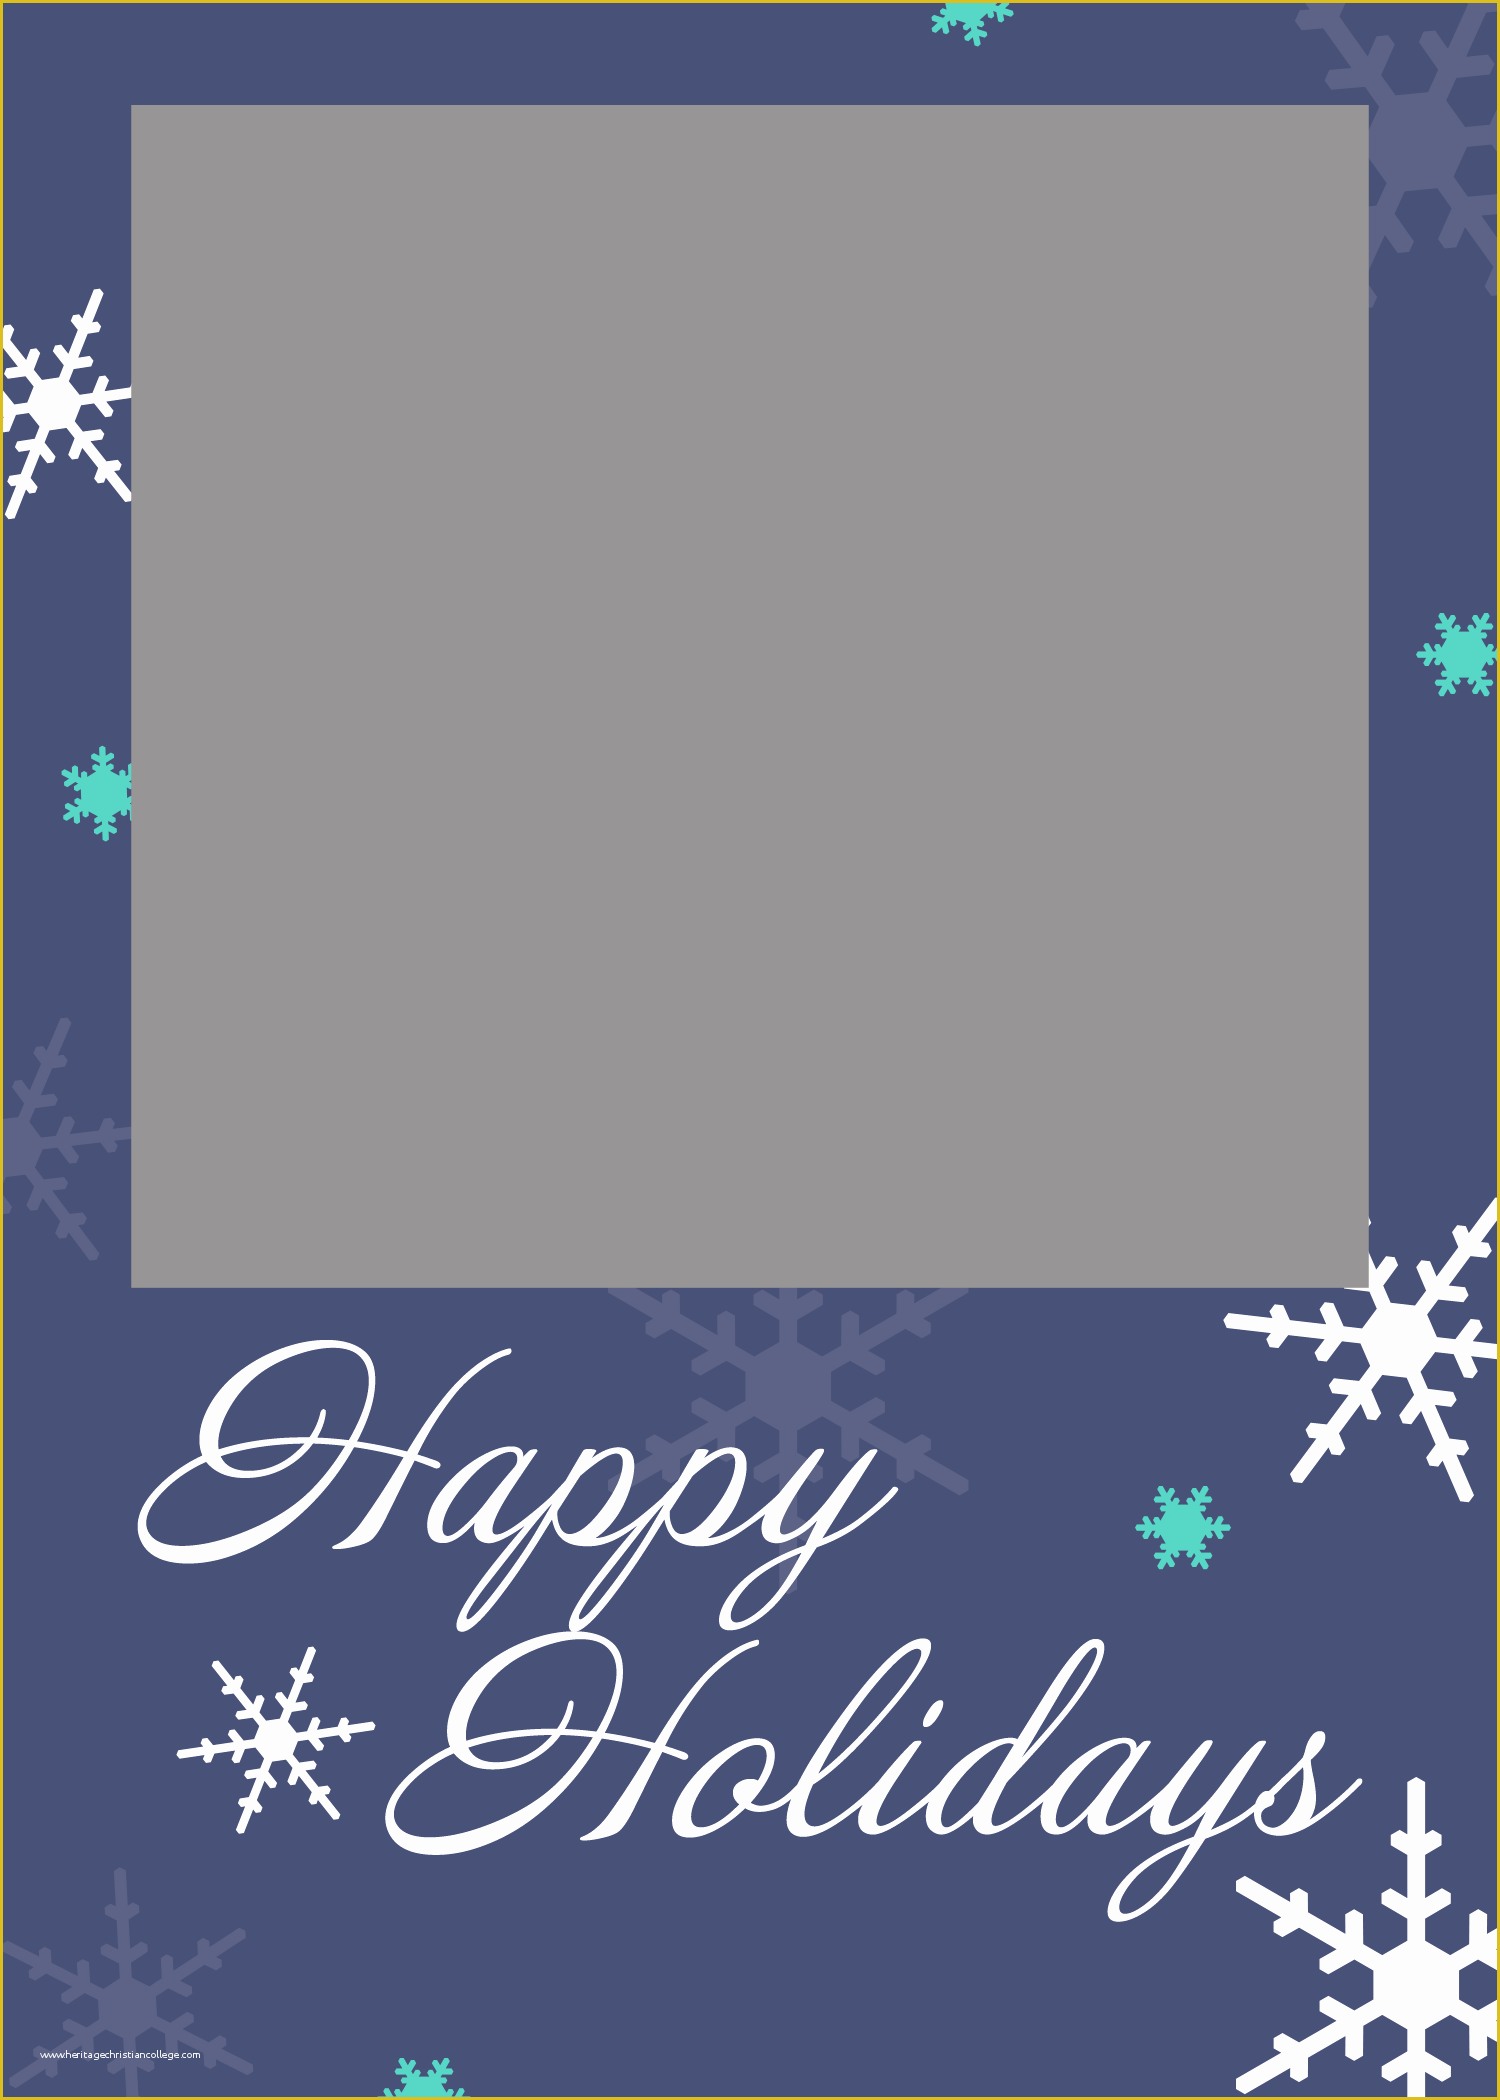 Free Printable Holiday Photo Card Templates Of Free Printable Holiday Card Plus Pixlr Video